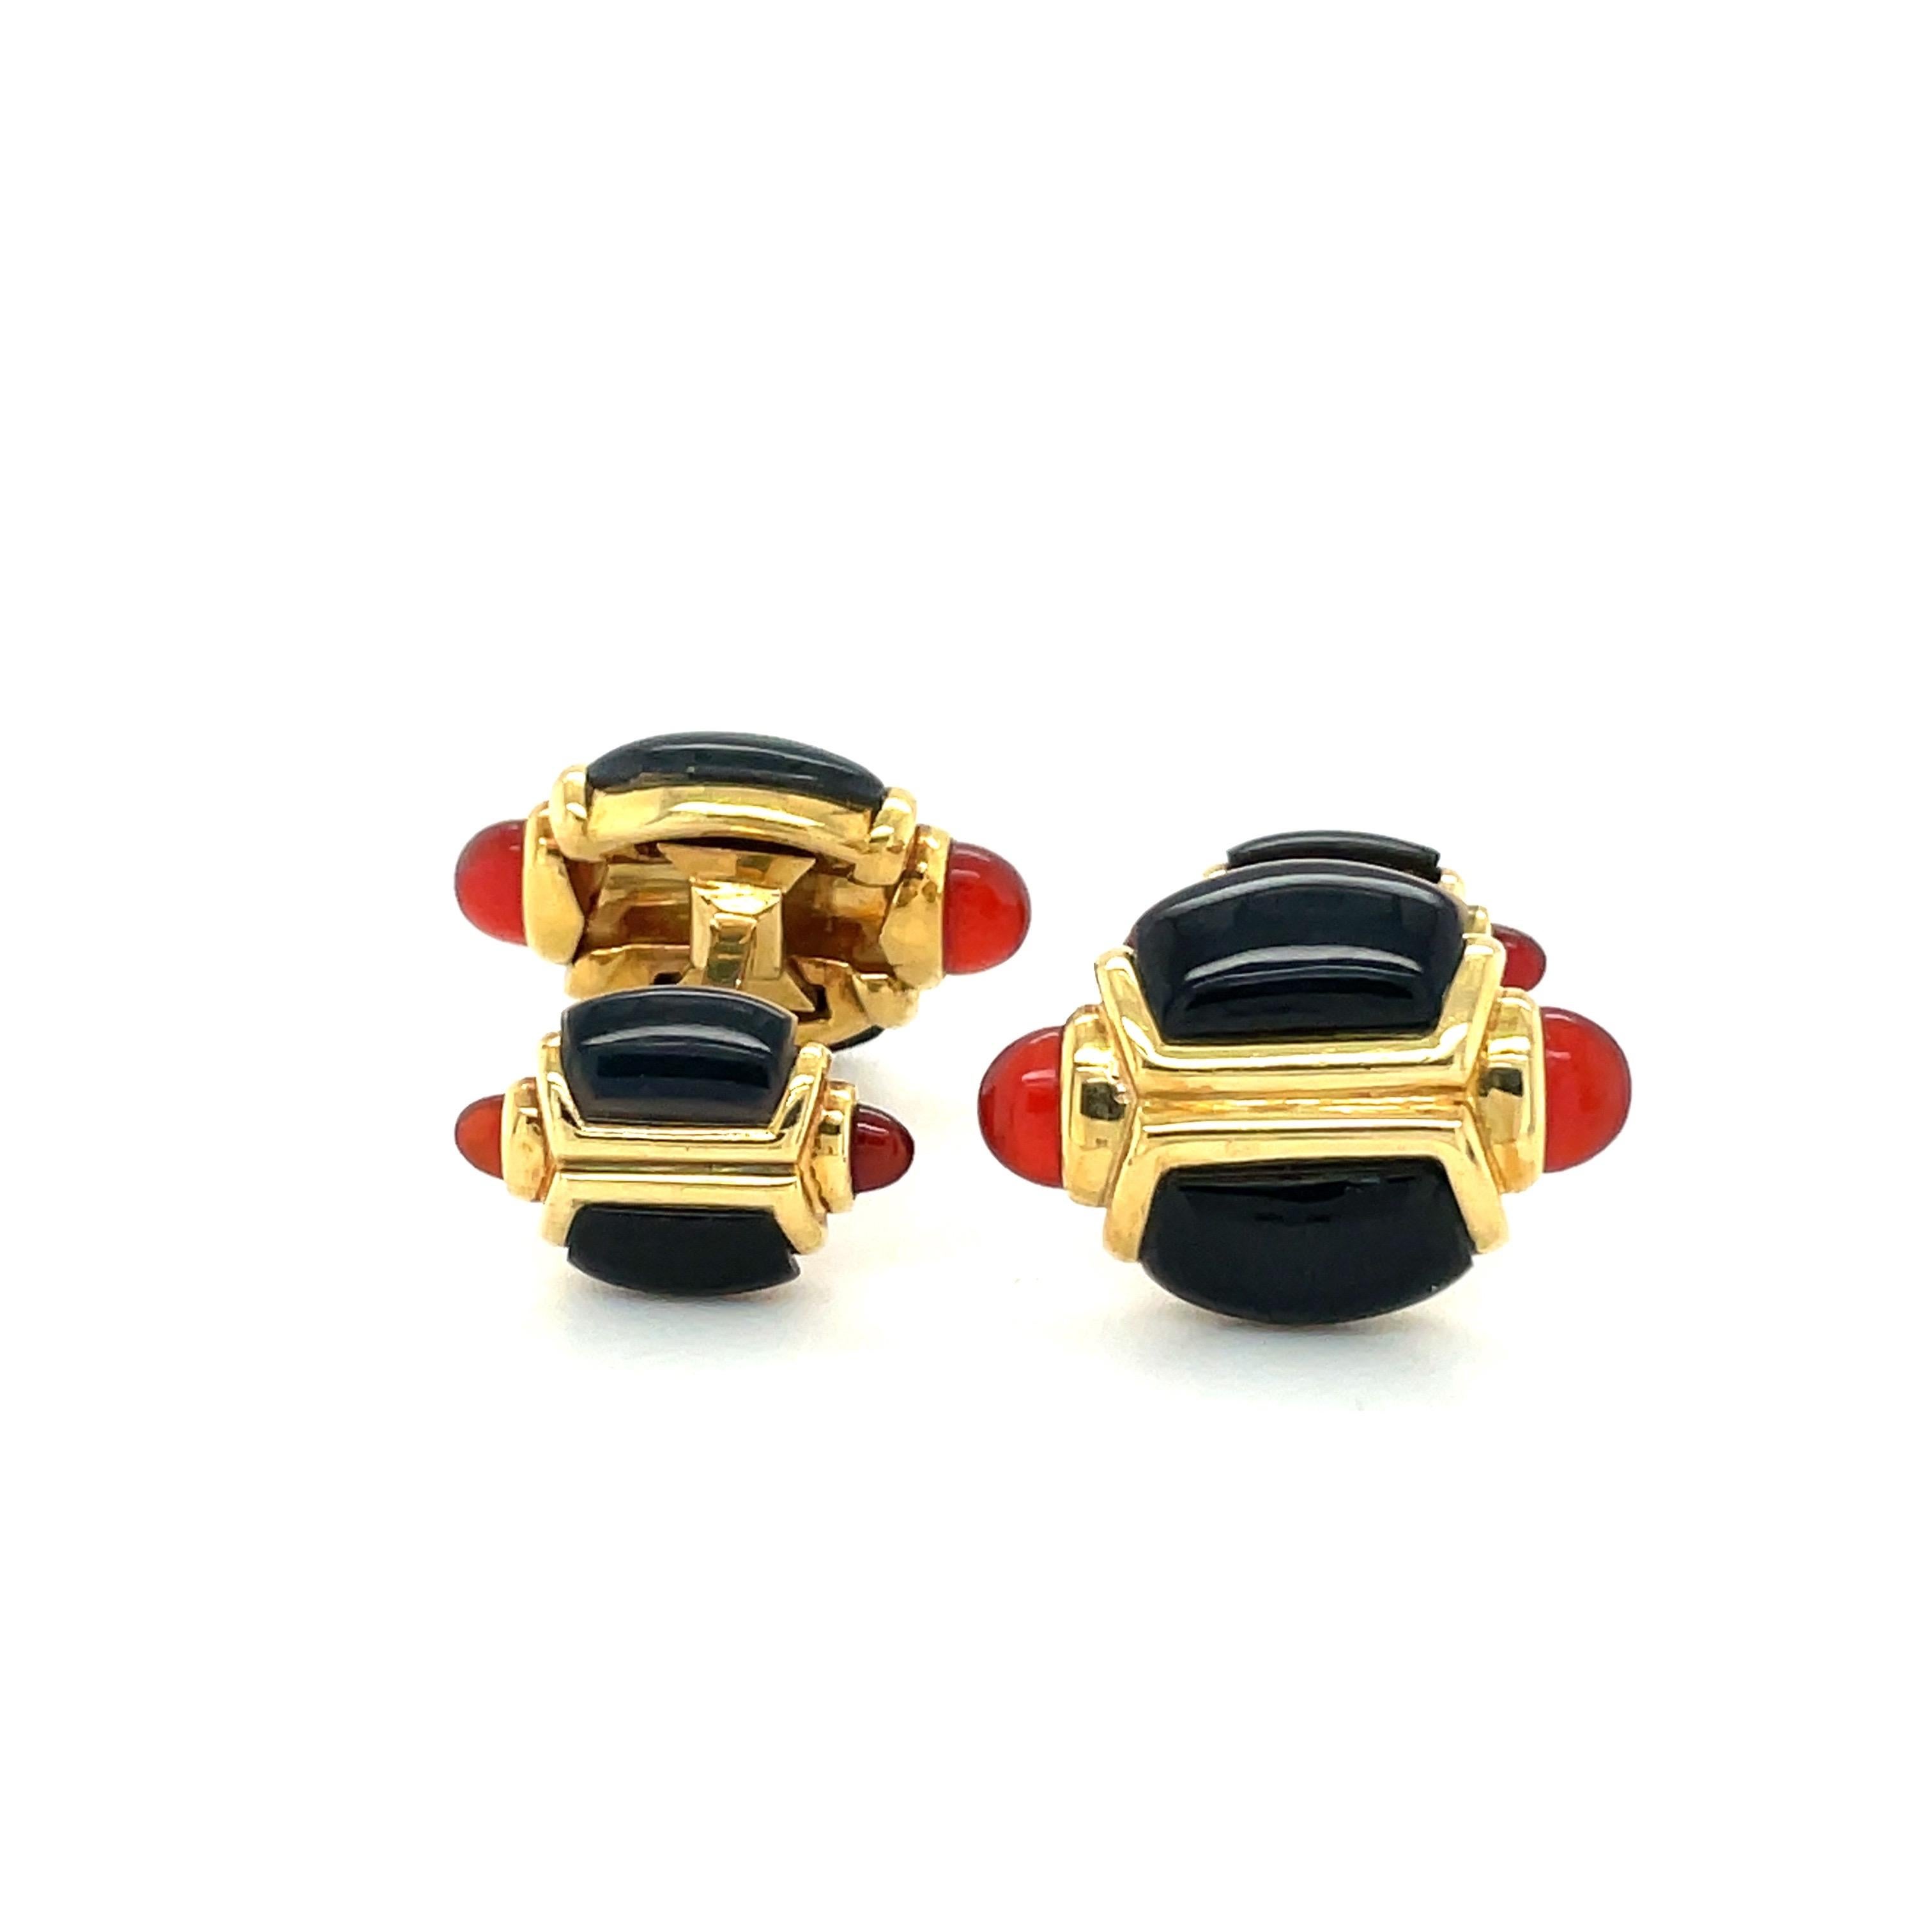 Albert Lipten 18KT Yellow Gold Cuff Links / Studs Dress Set Onyx and Carnelian In New Condition For Sale In New York, NY